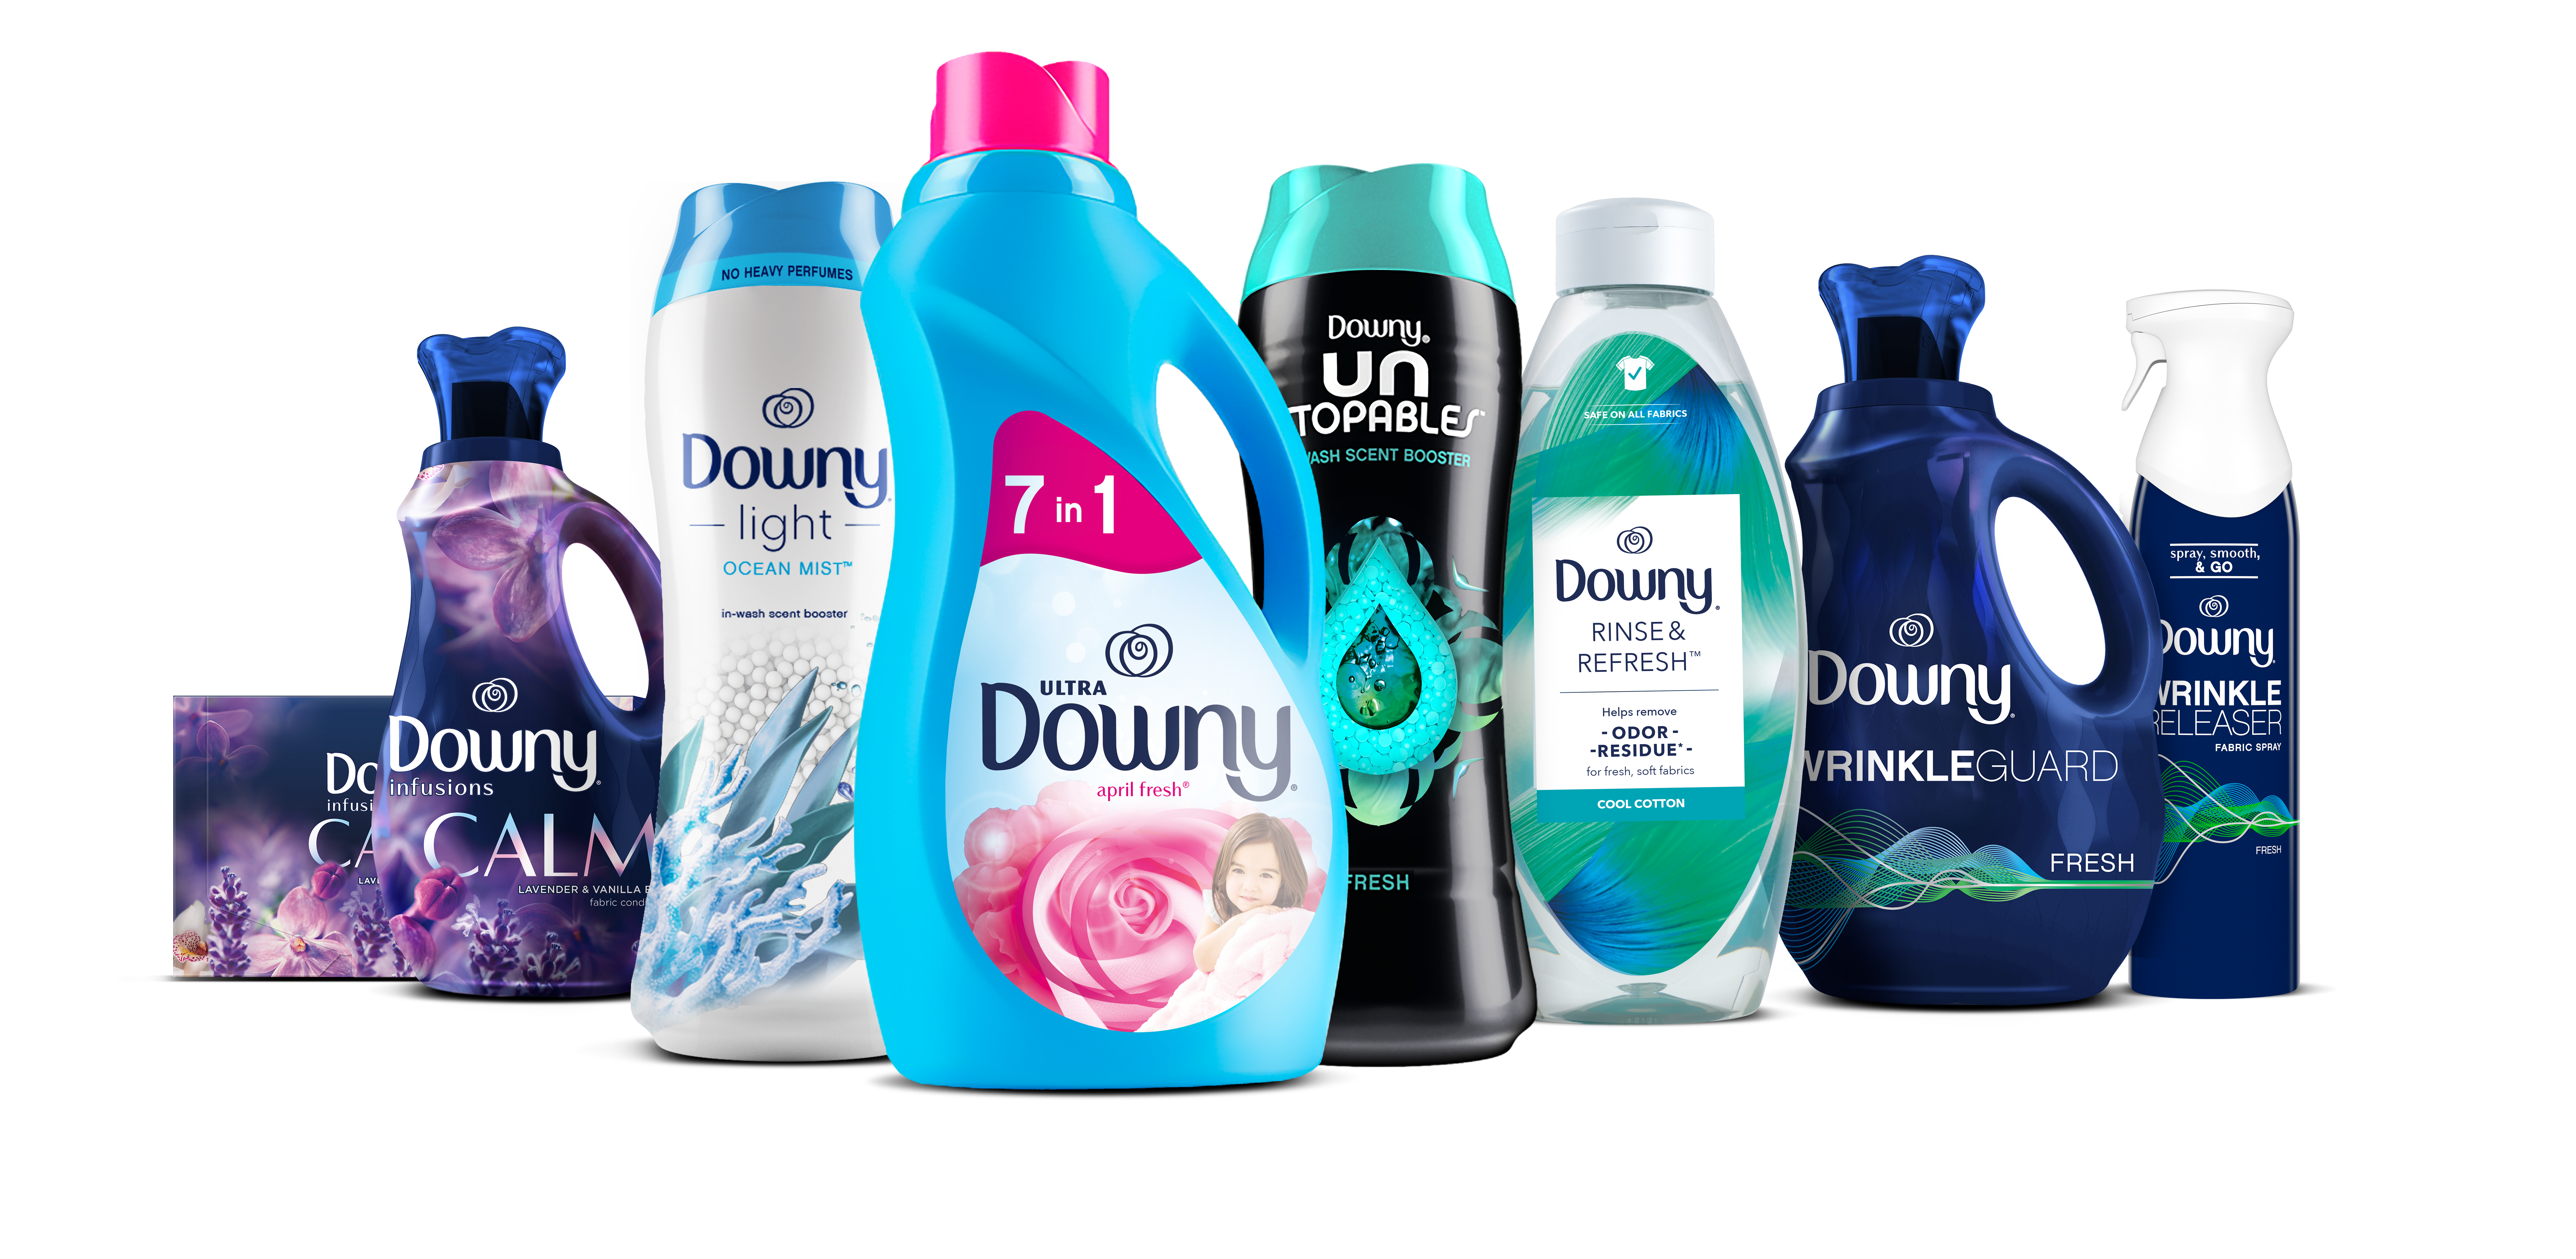 Downy protect the clothes you love with Fabric Softeners, In-wash Scent Booster Beads and Dryer Sheets